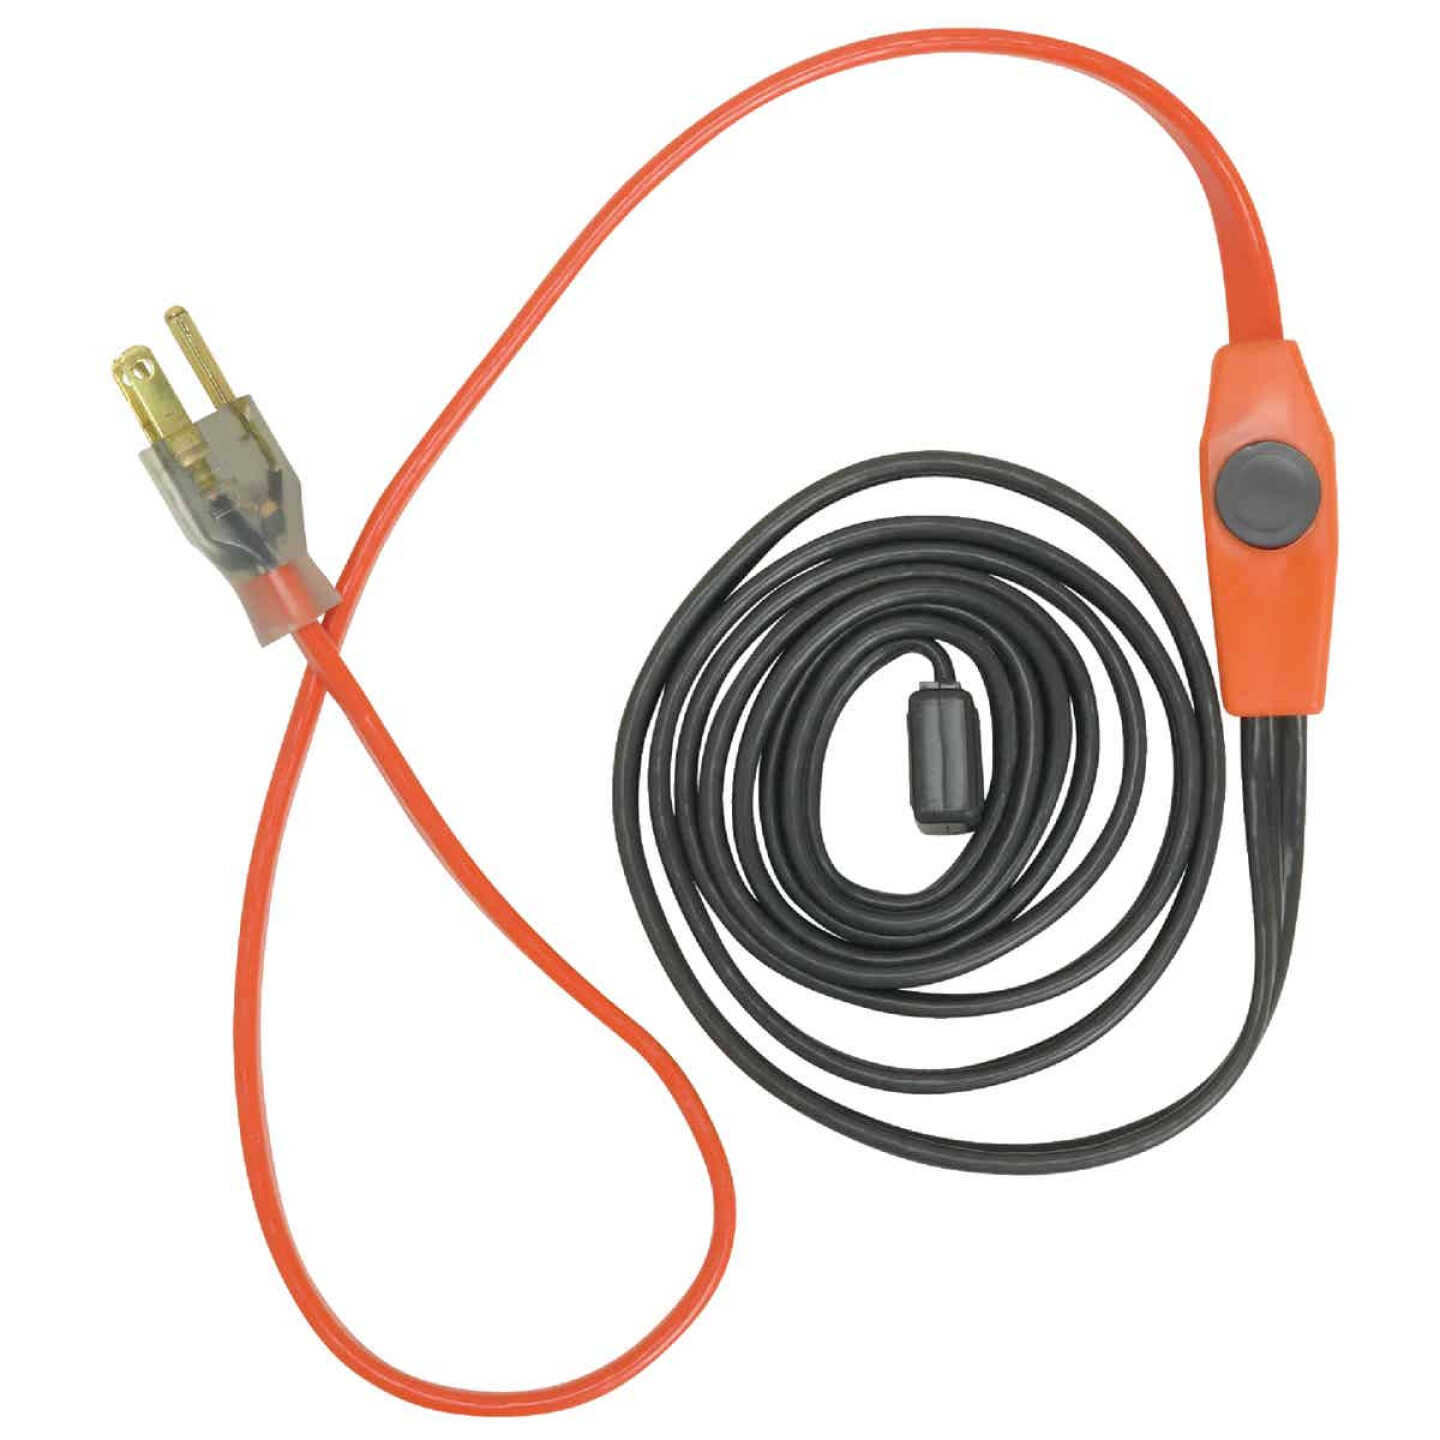 Easy Heat 24 Ft. 120V Pipe Heating Cable - Parker's Building Supply